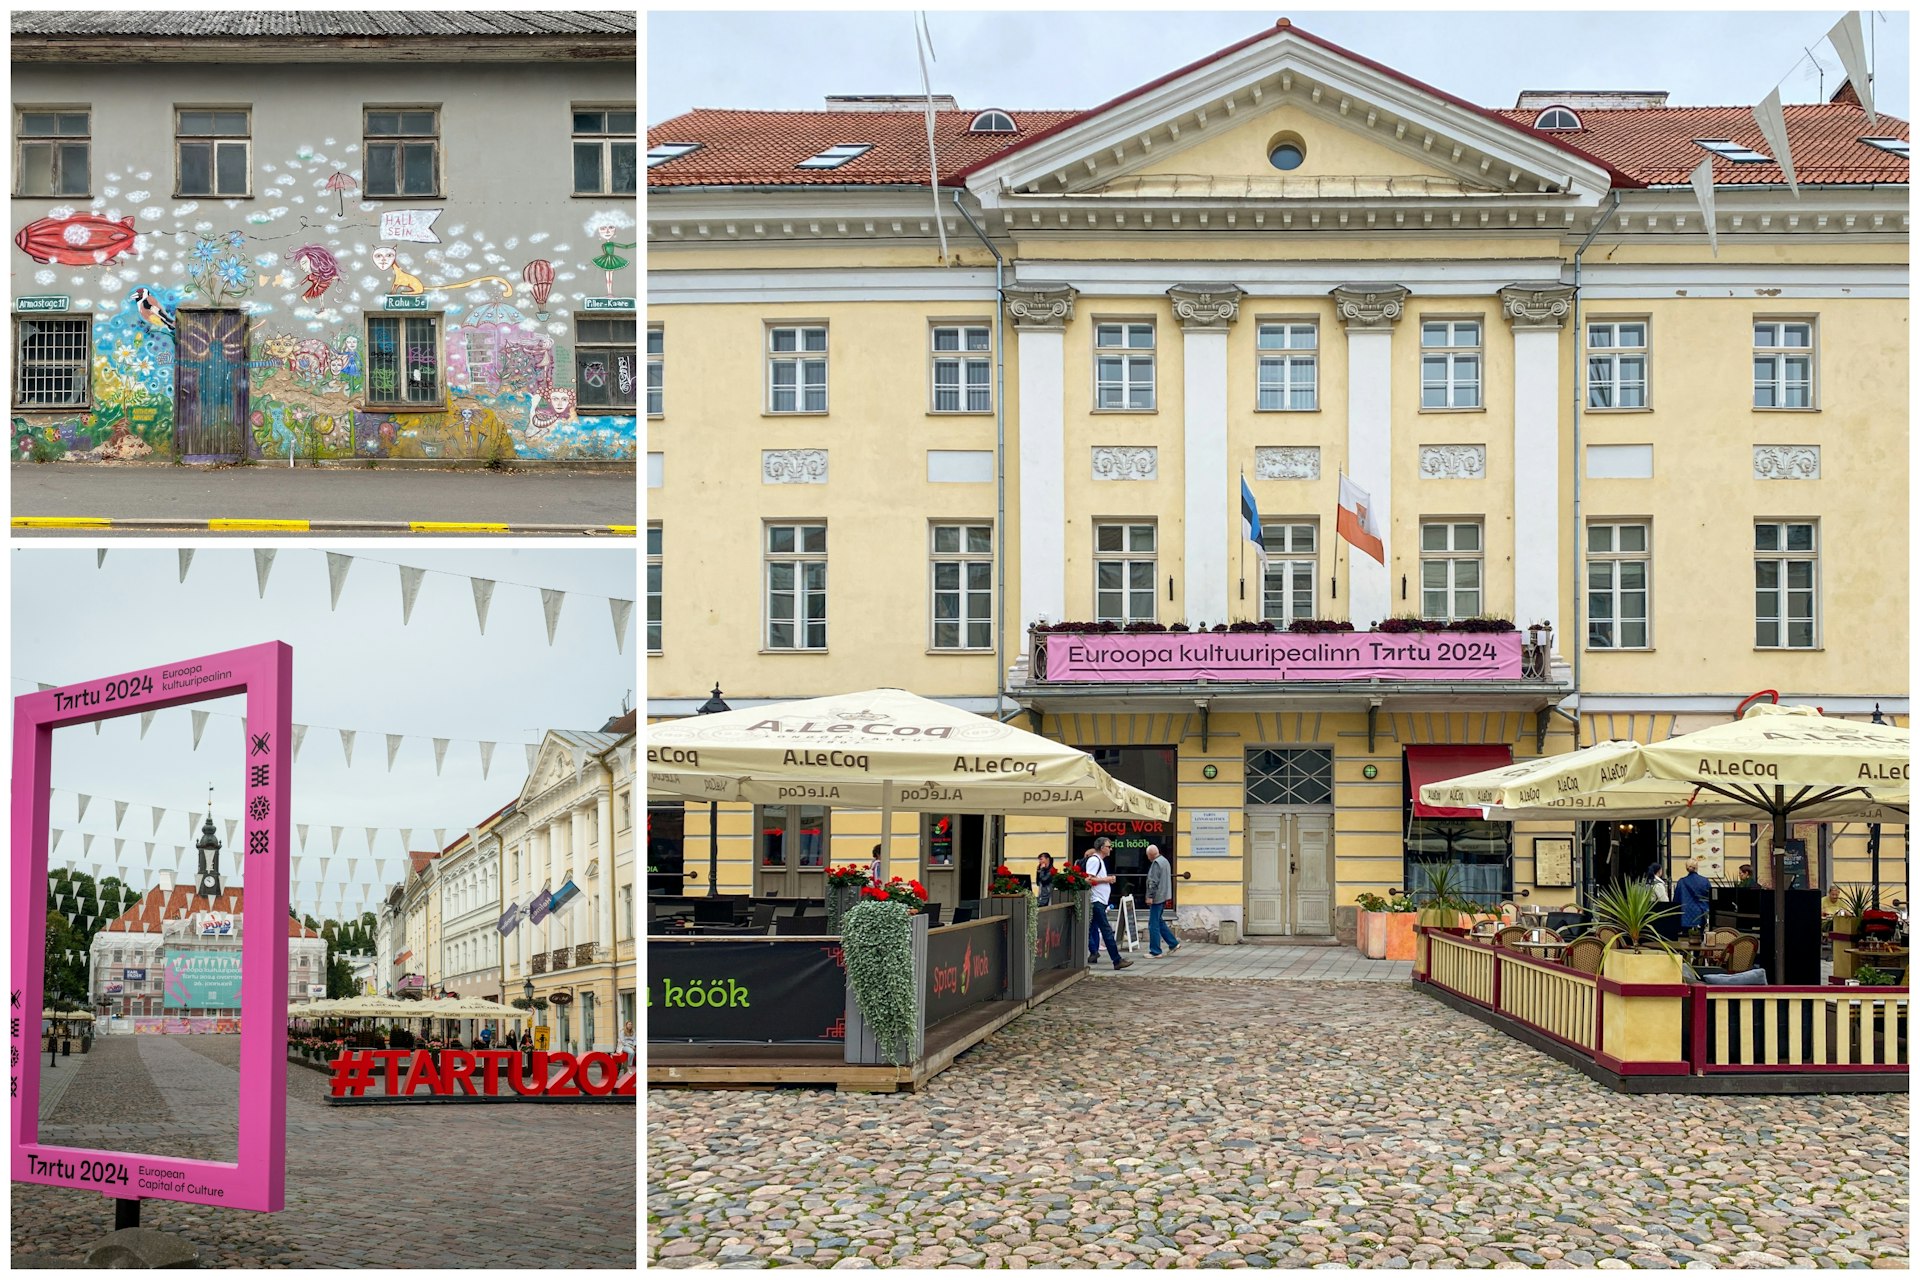 Tartu's colorful Town Hall and downtown derelict buildings decorated with street art